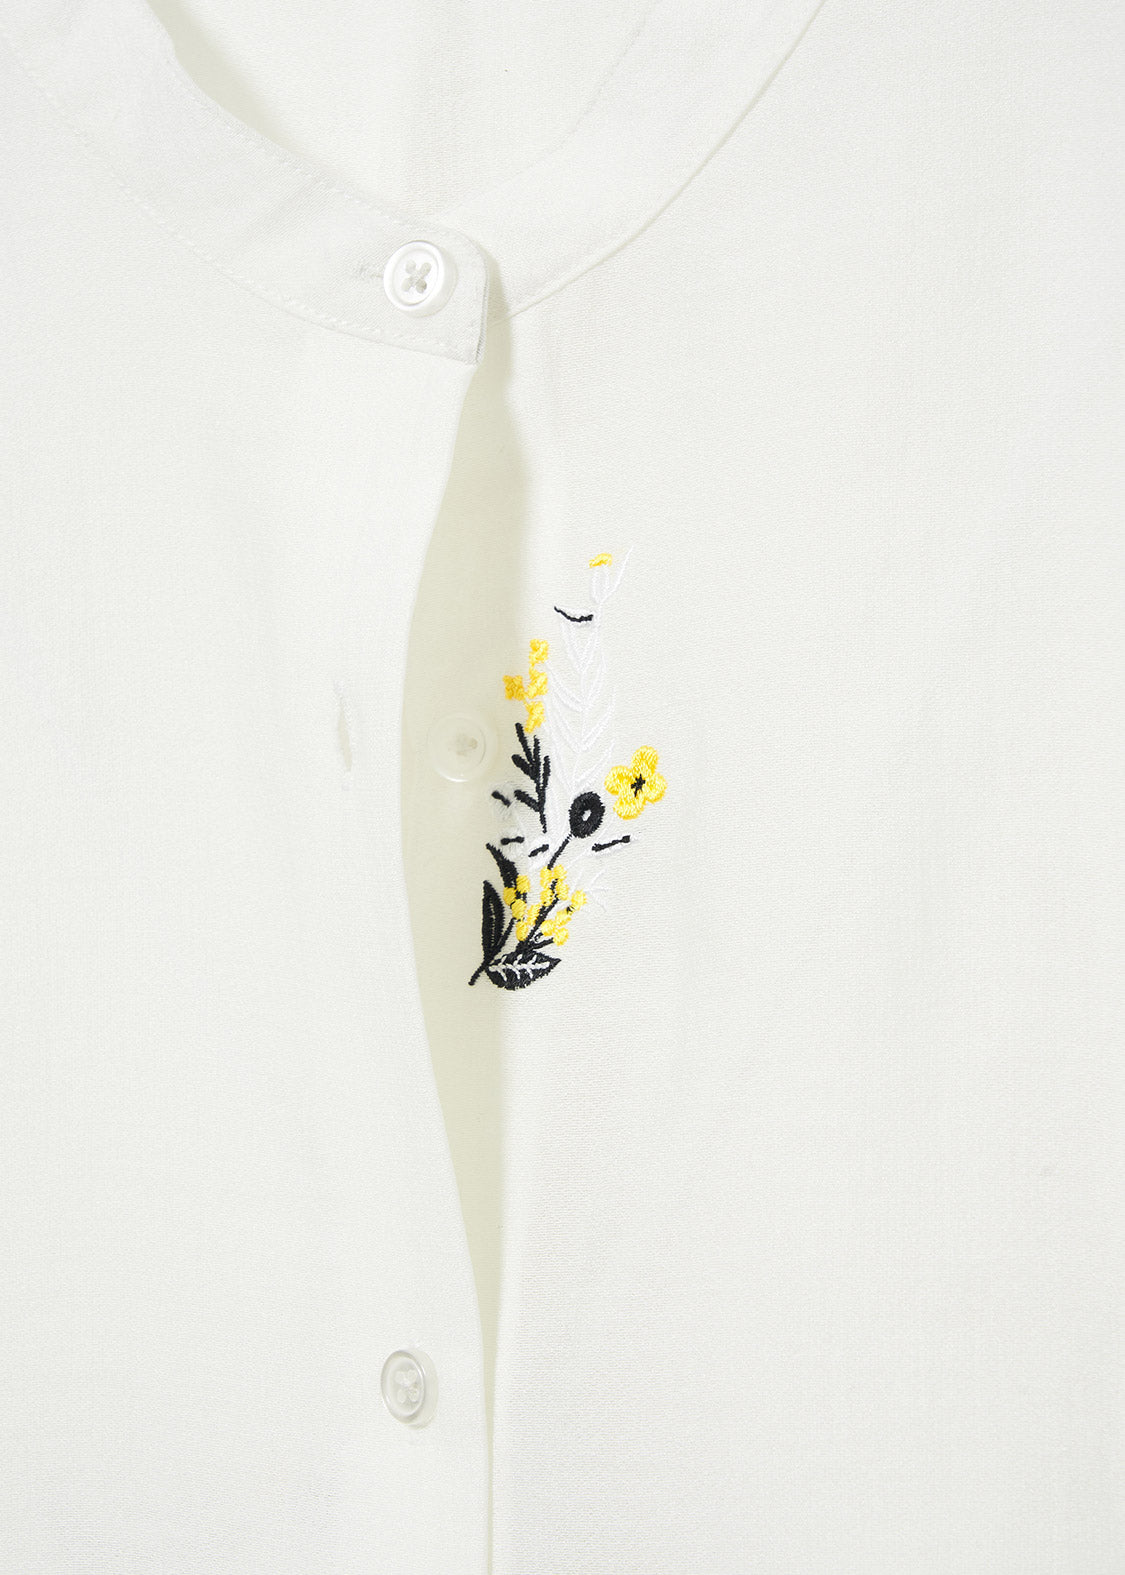 Embroidery Short Sleeve Shirt (Wild Swag)